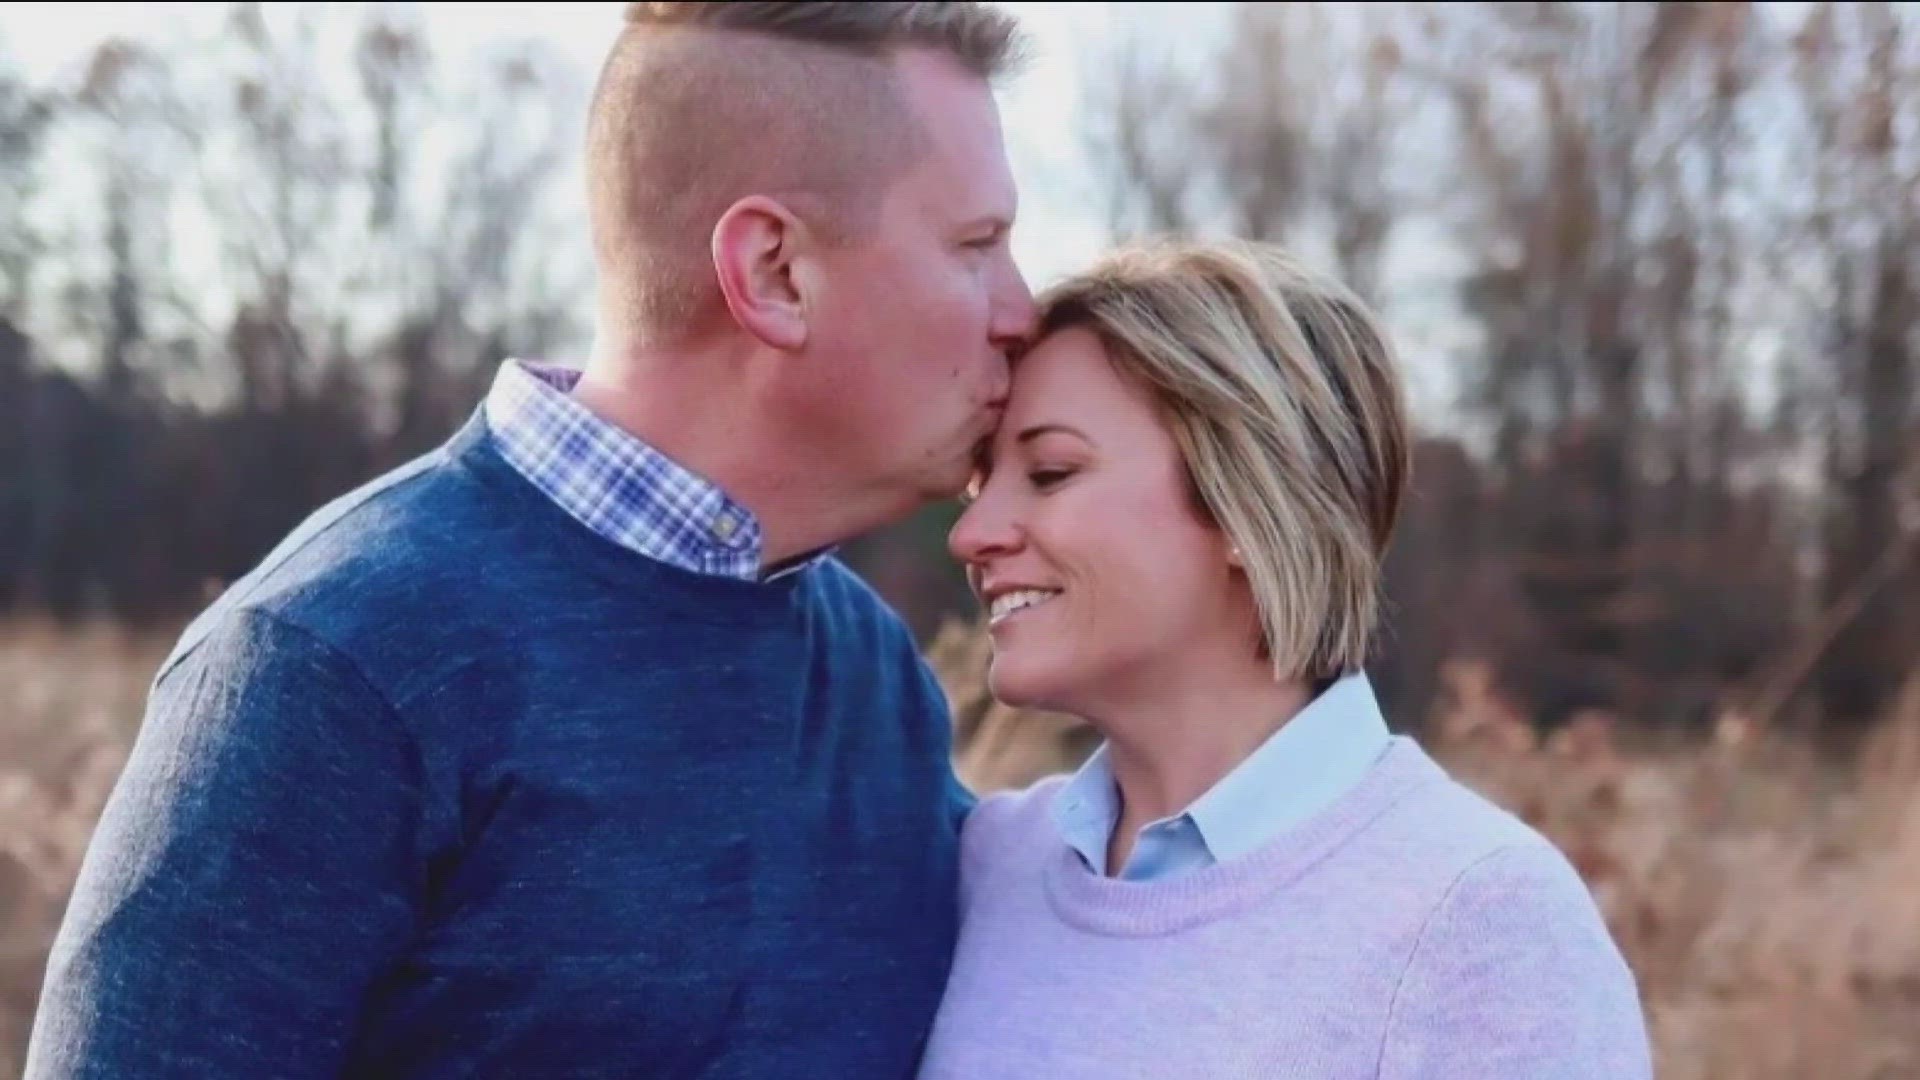 Sara Shaw, an officer with the Oregon Police Department, lost her husband, fellow officer Mike Shaw, to suicide on Oct. 3, 2020.